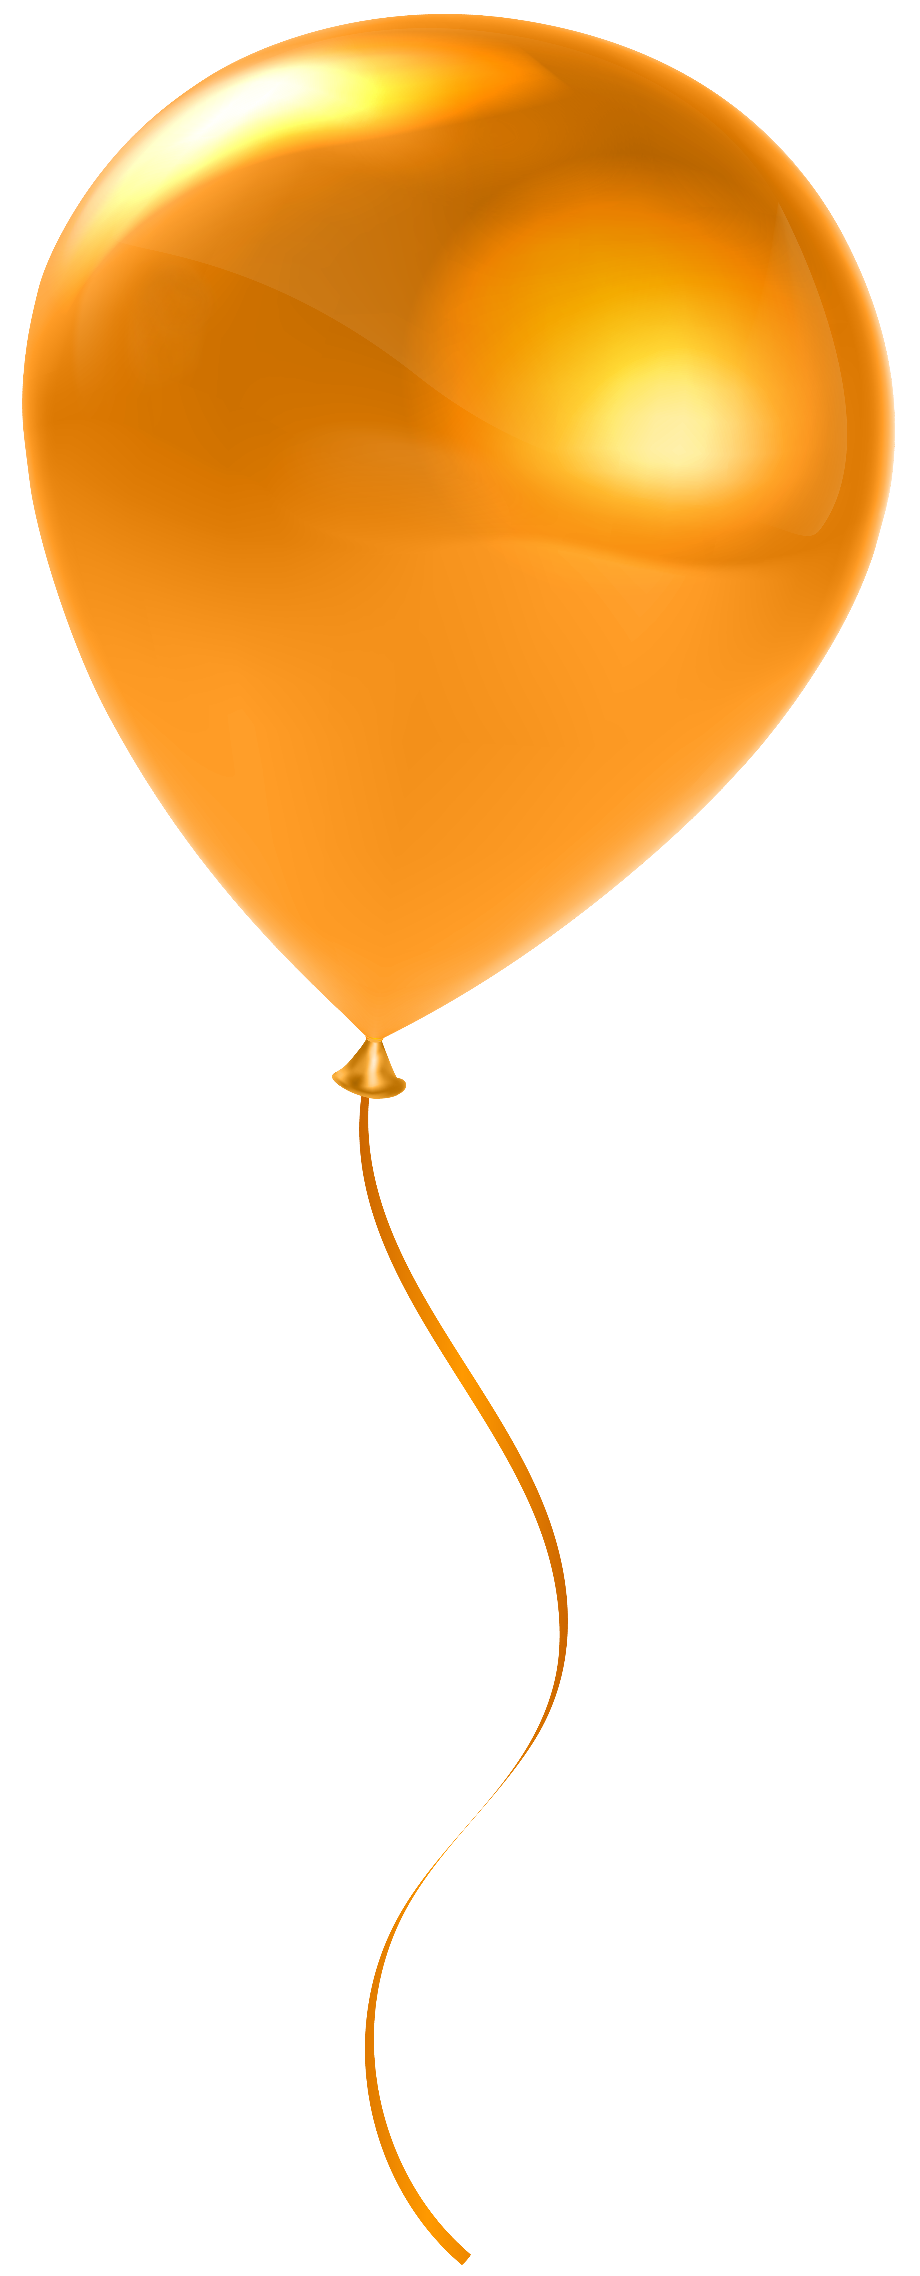 Download High Quality balloon clipart orange Transparent PNG Images ...